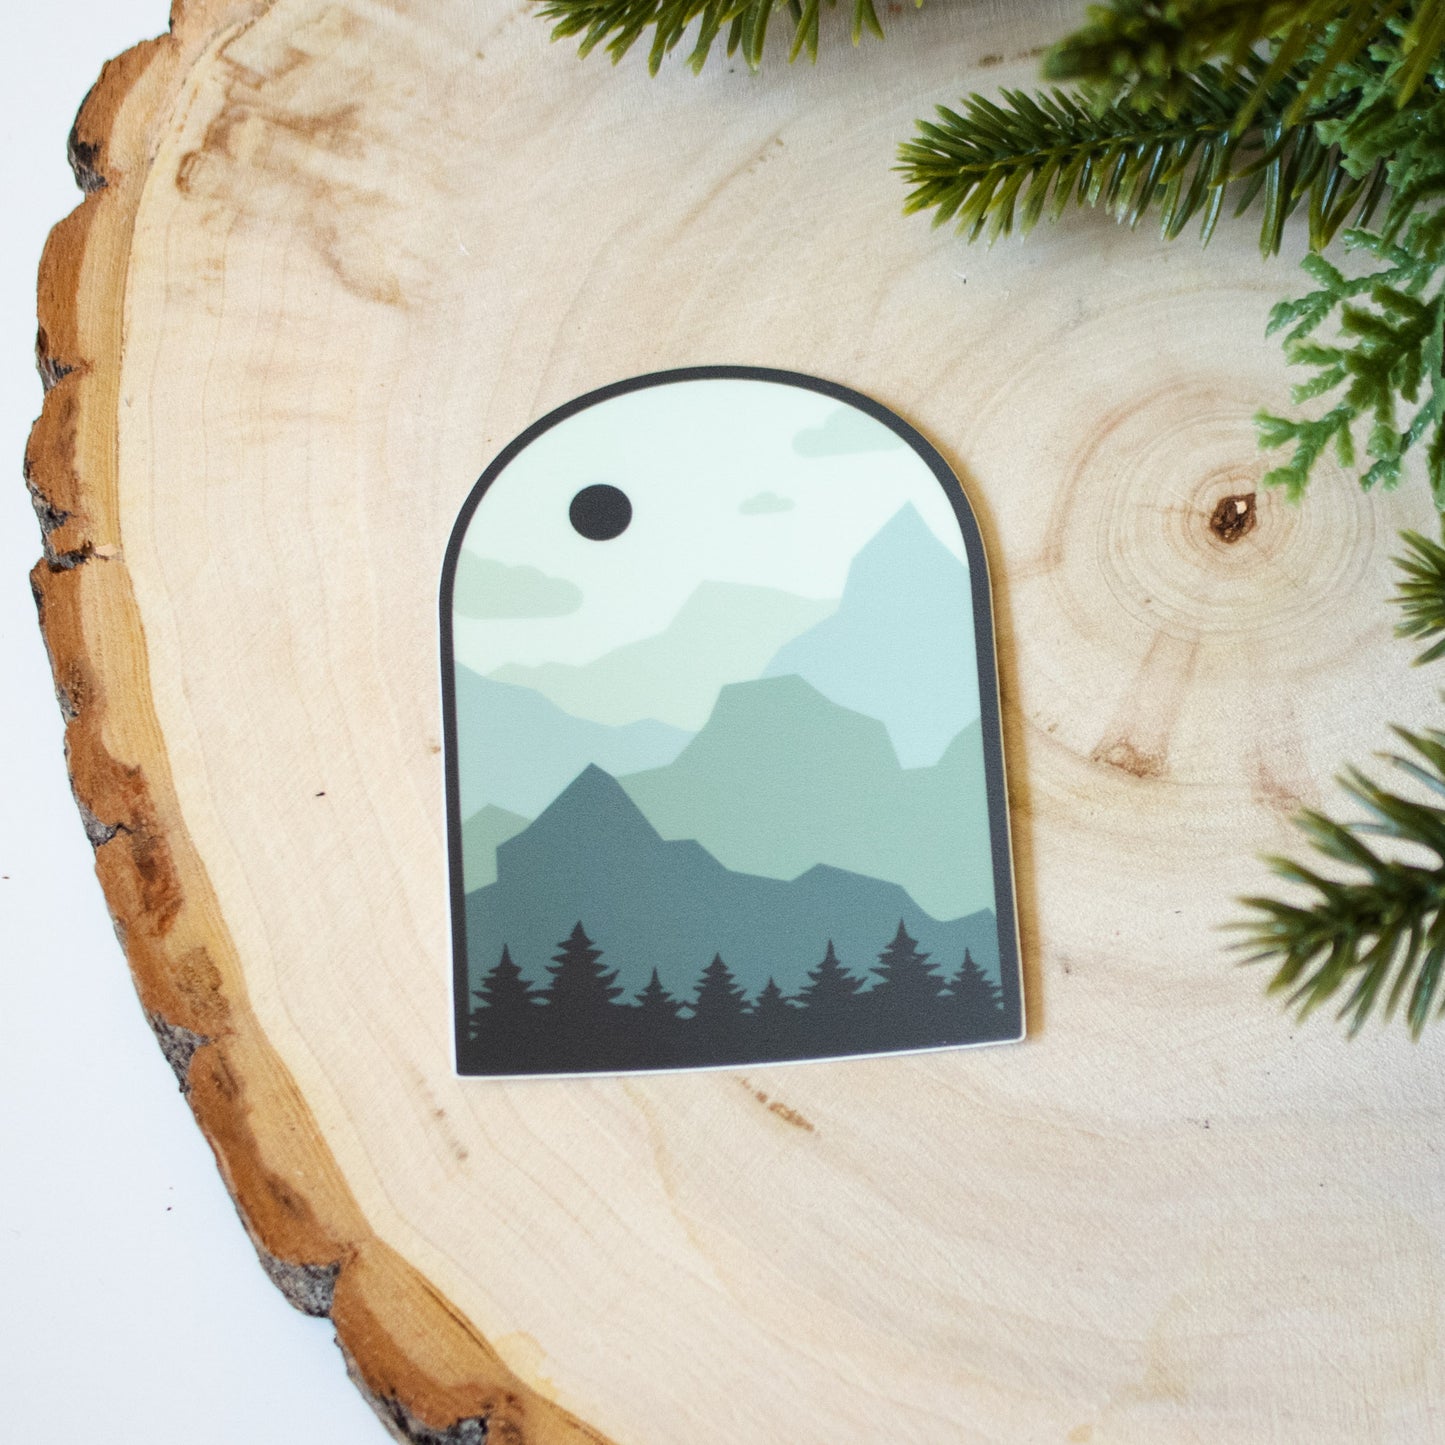 Rounded top sticker showing pine trees, layers of mountain, and a full moon